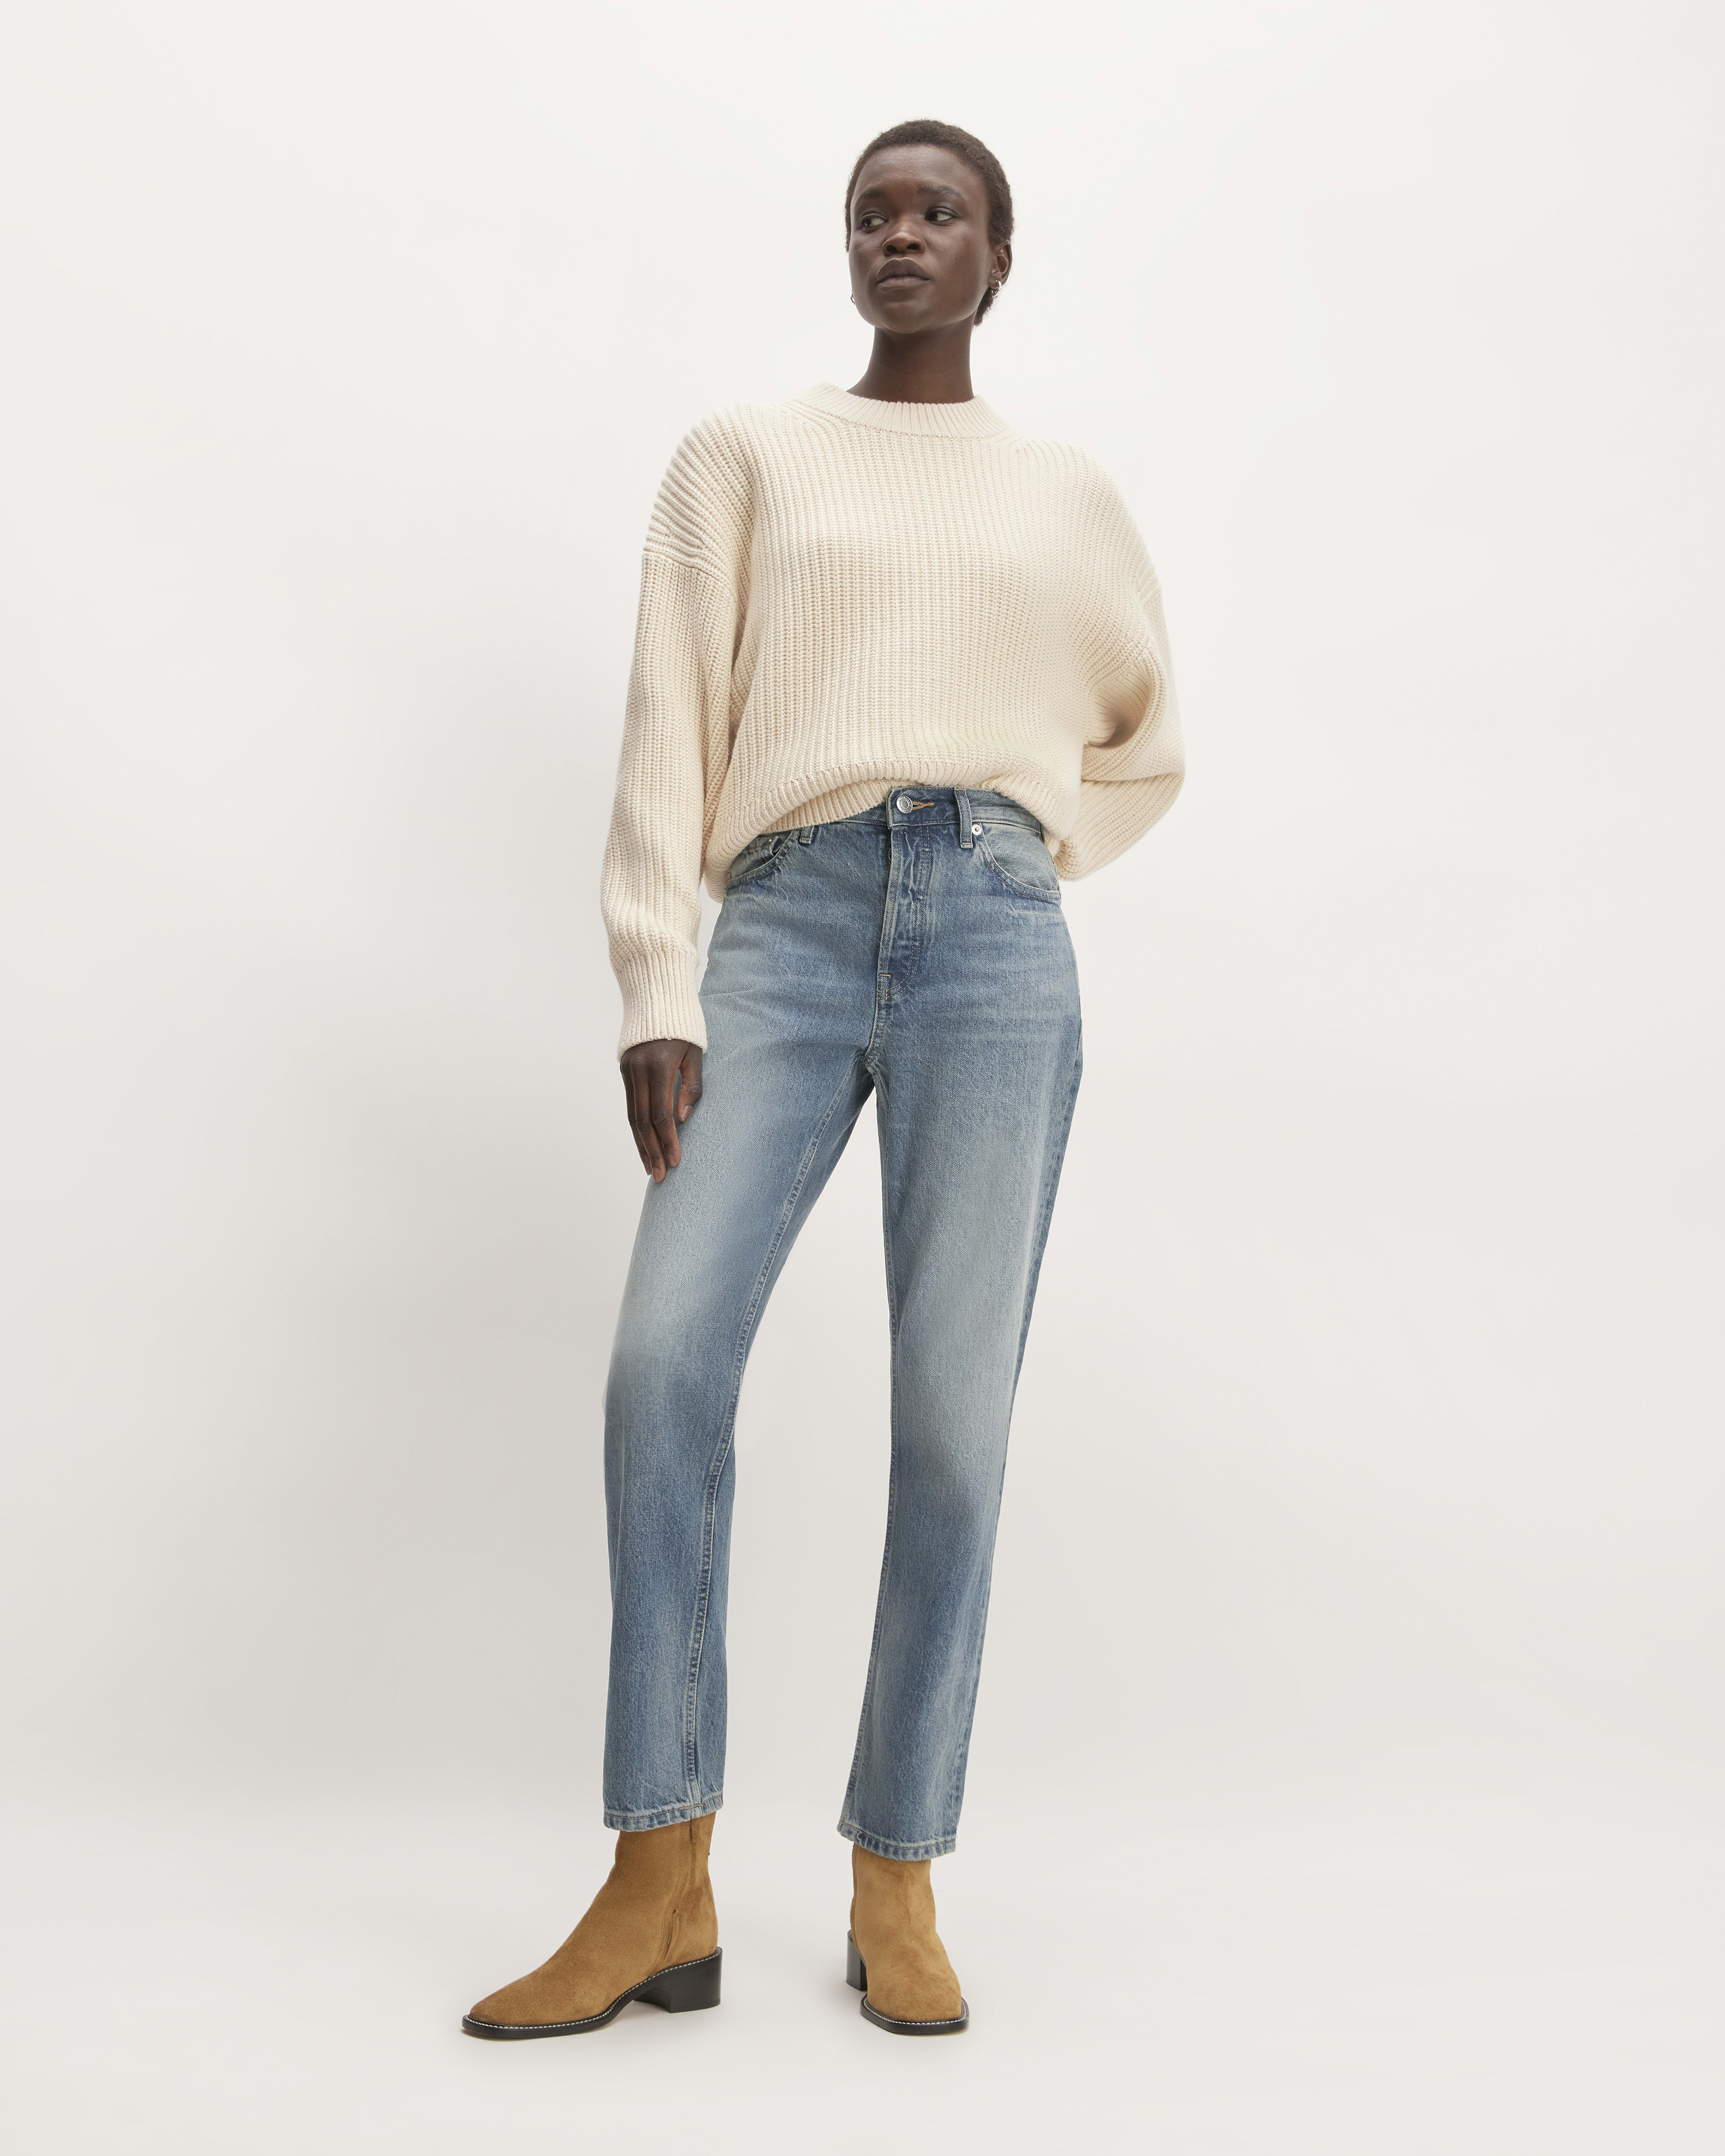 Everlane The Cheeky Bootcut in Washed Black High Waist Ankle Flare Jean  Size 30